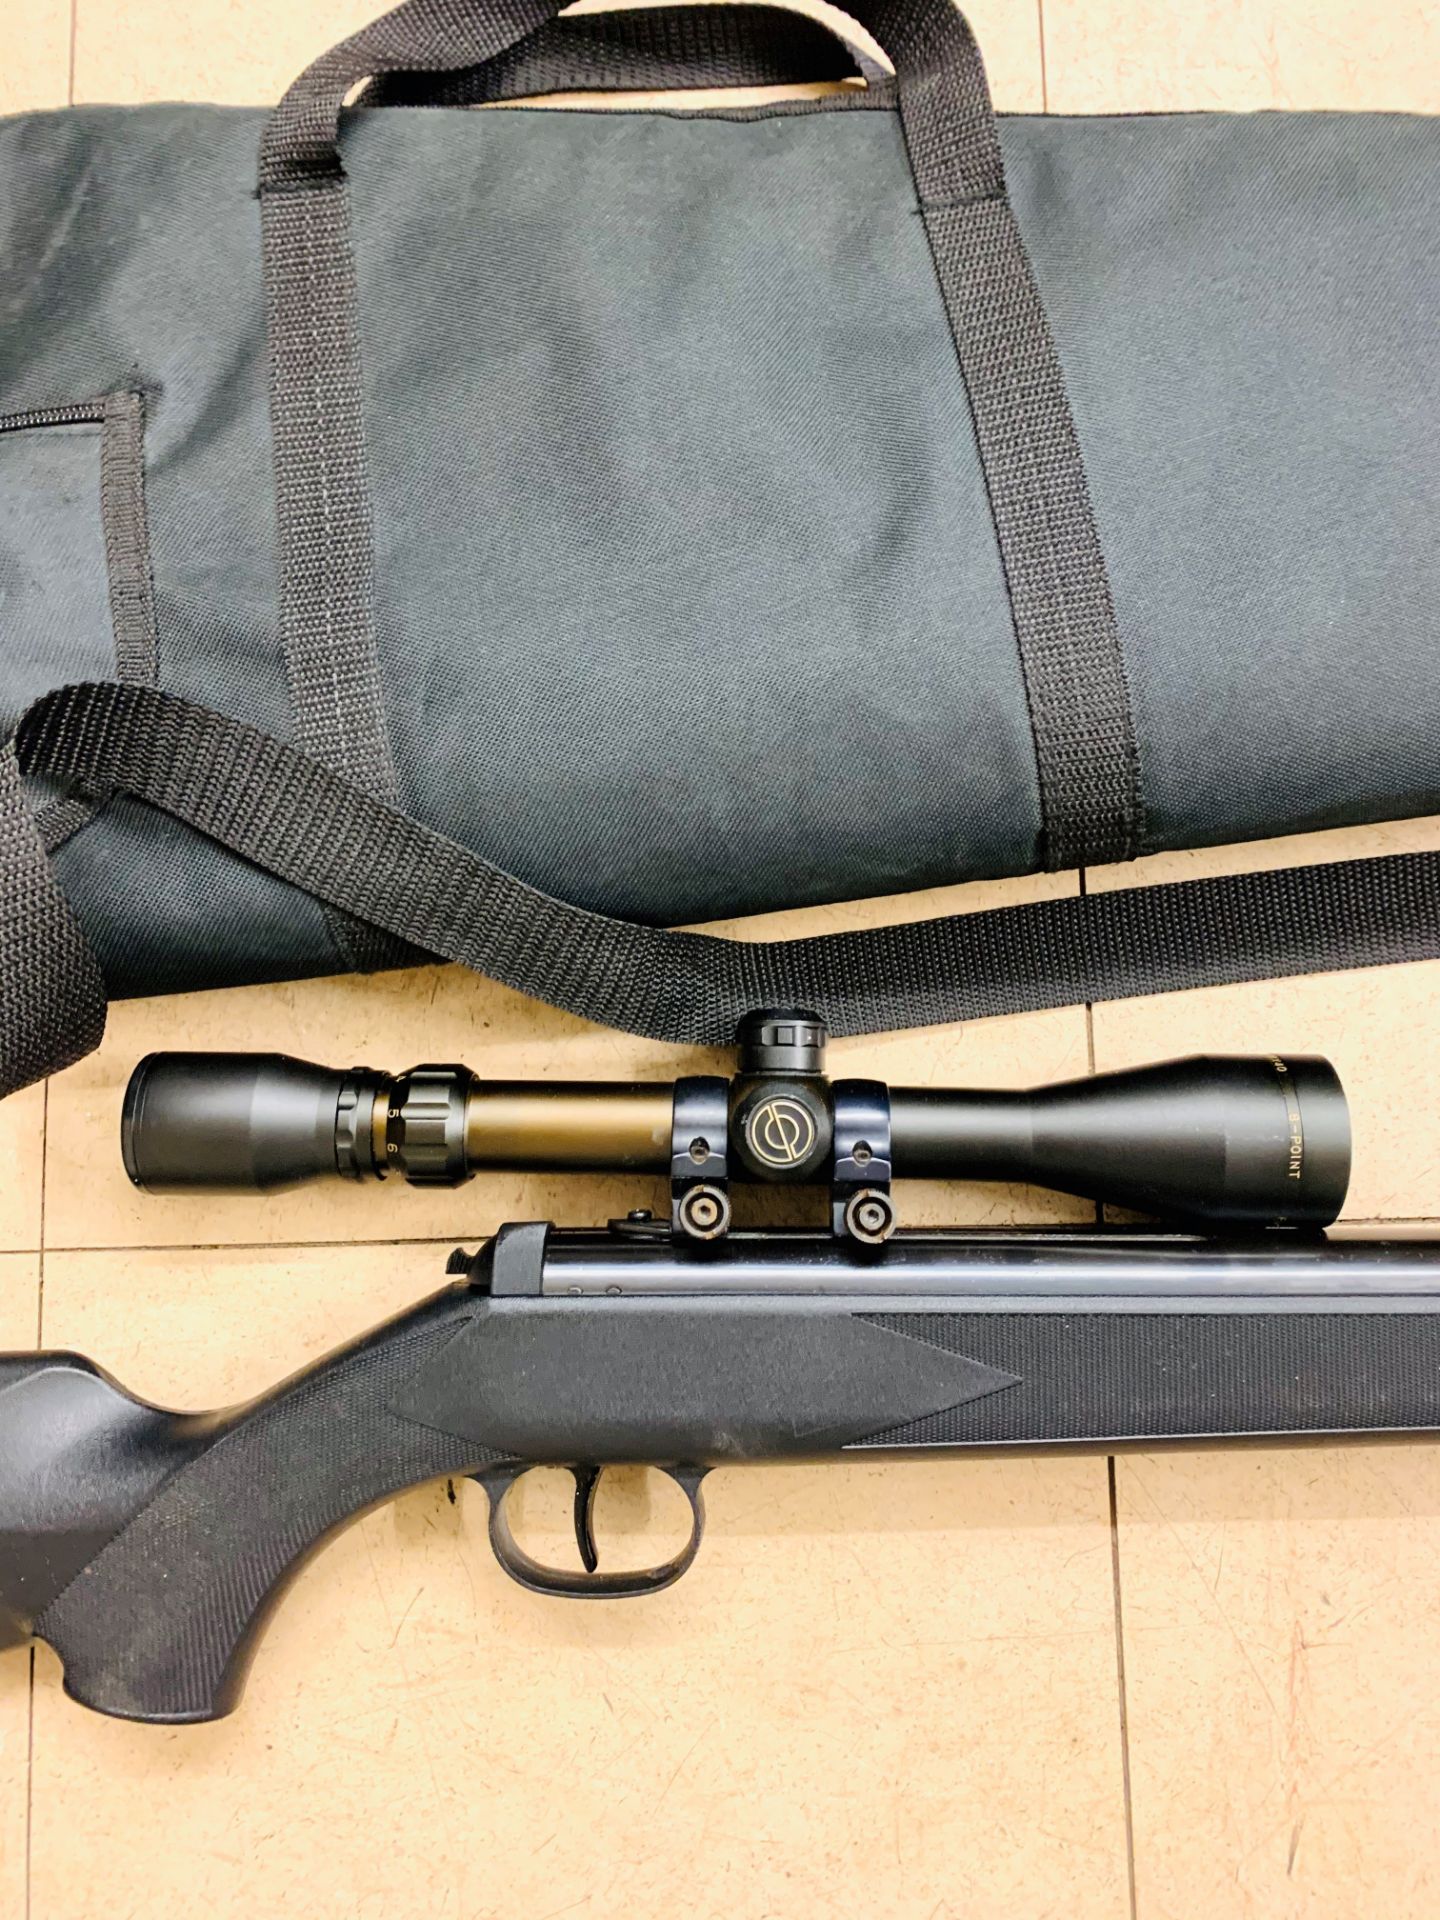 Hammerli Black Force 800 .22 Air Rifle, with scope and suppressor - Image 2 of 5